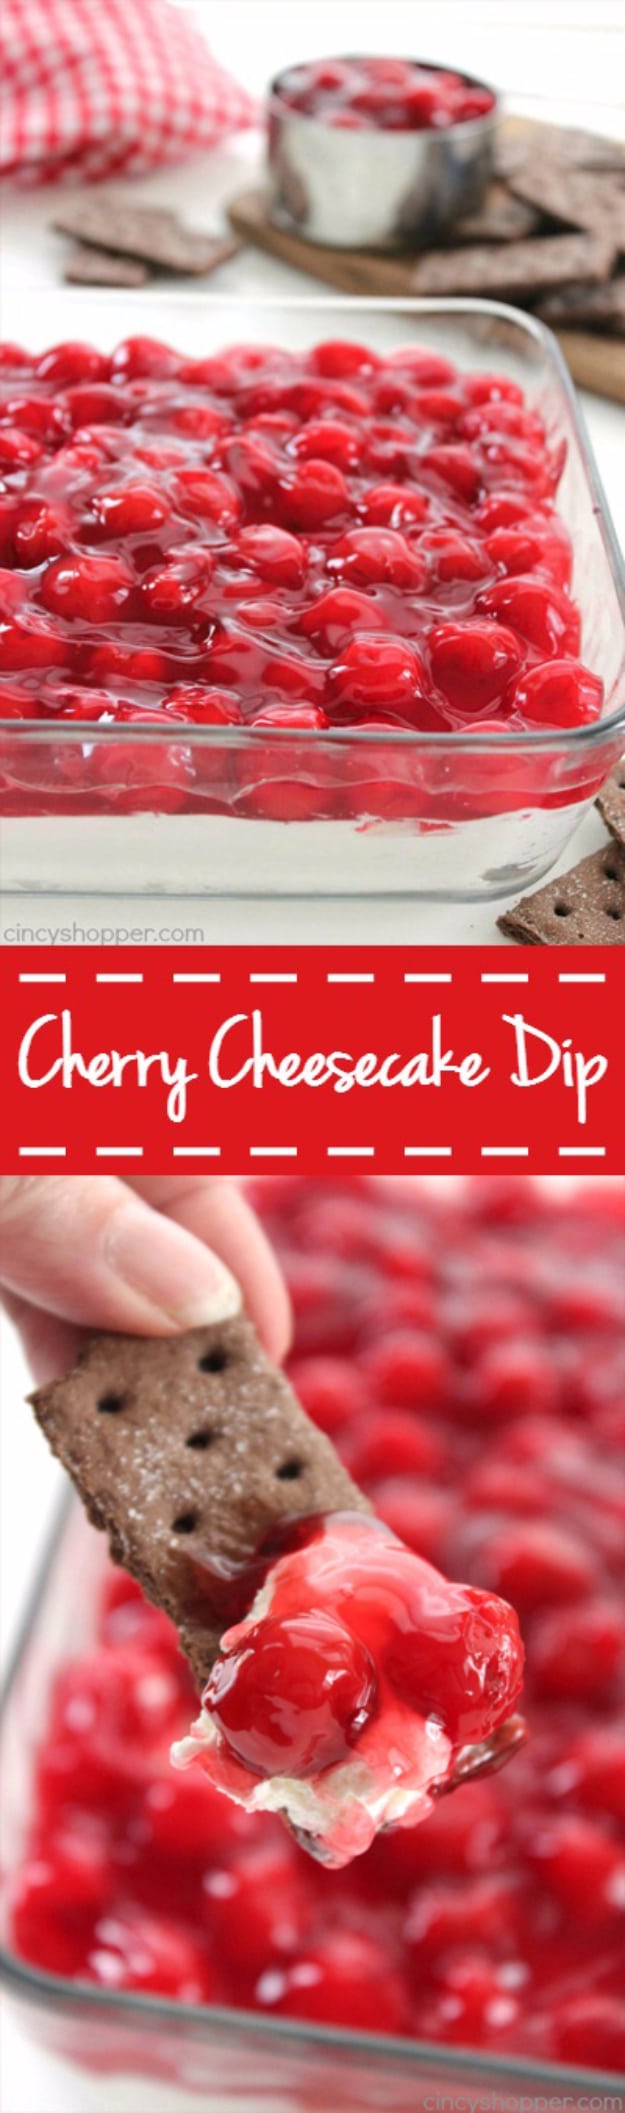 Last Minute Dessert Recipes and Ideas - Cherry Cheesecake Dip - Healthy and Easy Ideas for No Bake Recipe Foods, Chocolate, Peanut Butter. Best Simple Ideas for Summer, For A Crowd and for Parties 